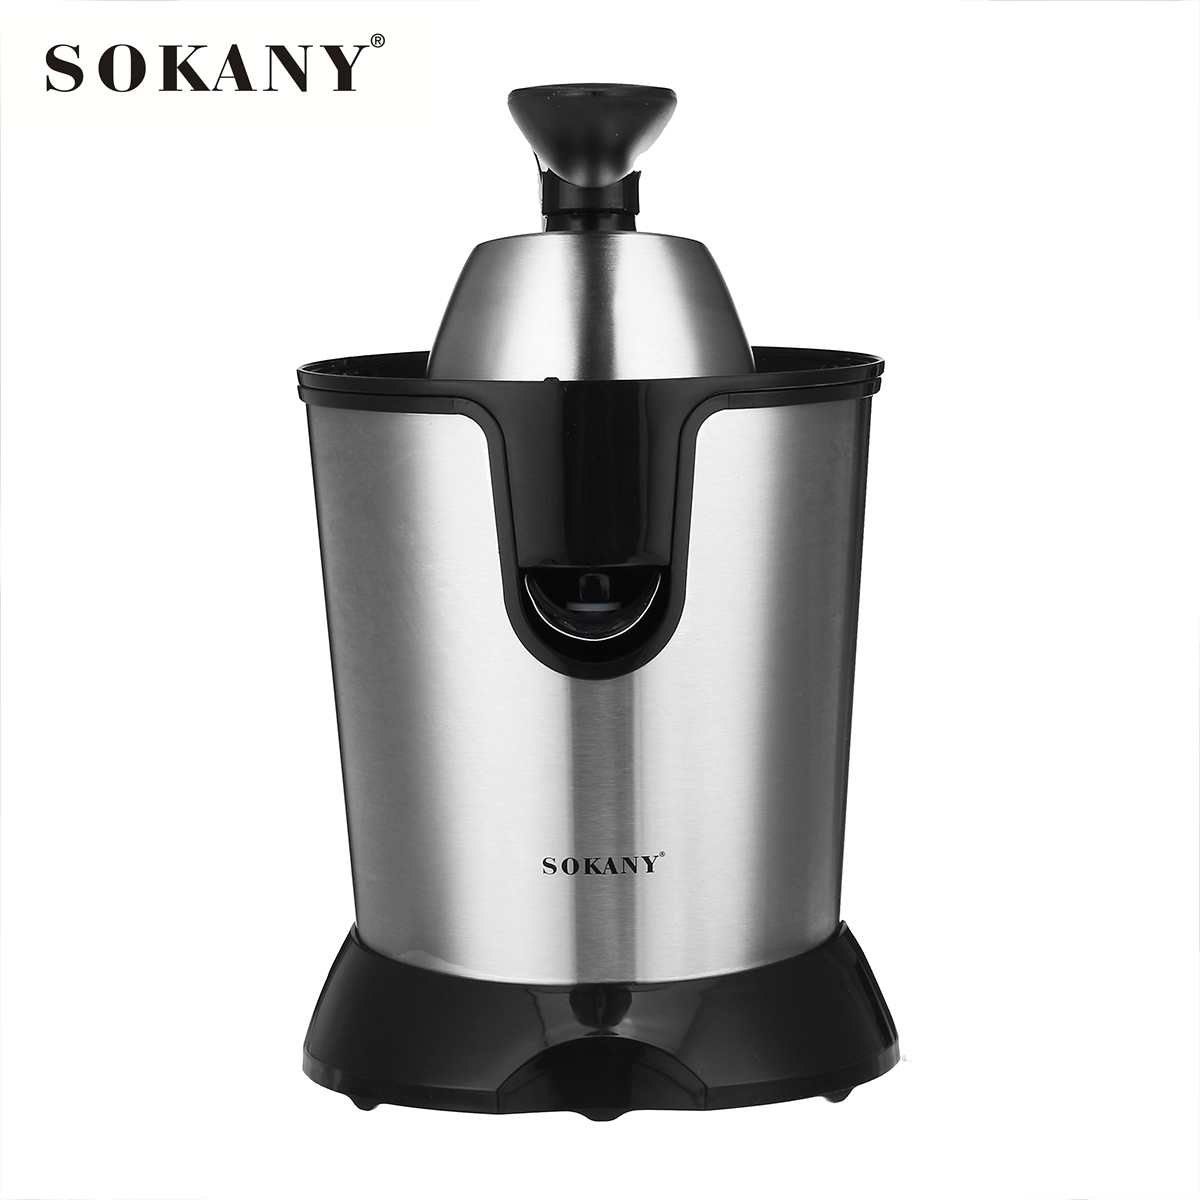 SOKANY Stainless Steel Juicer 350W Orange Lemon Electric Juicers Fruits Squeezer Extractor for Kitchen Home Appliances